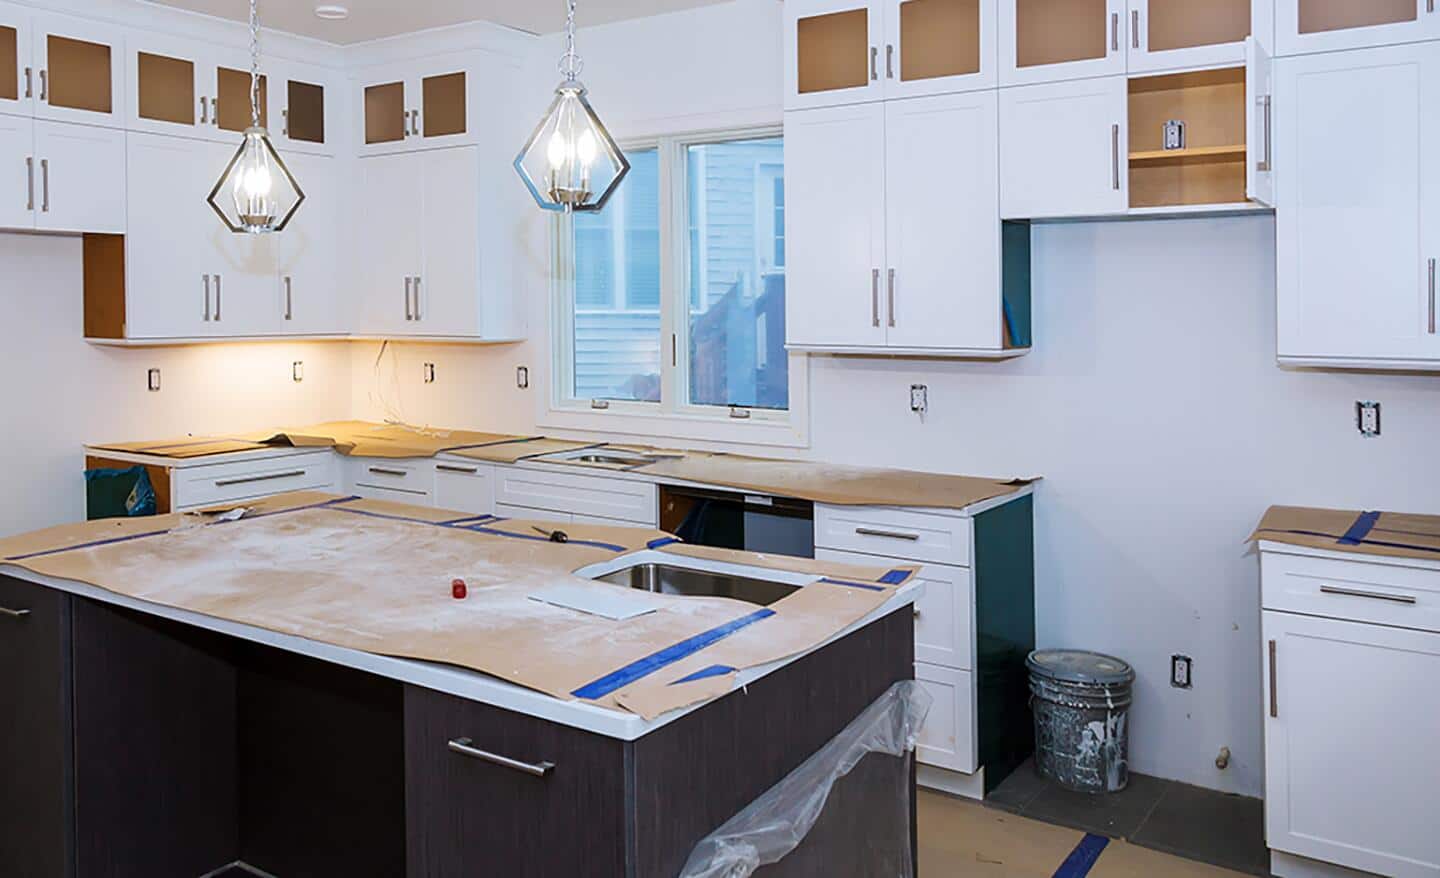 A kitchen with partially-installed cabinets and a large space where a refrigerator will be installed.